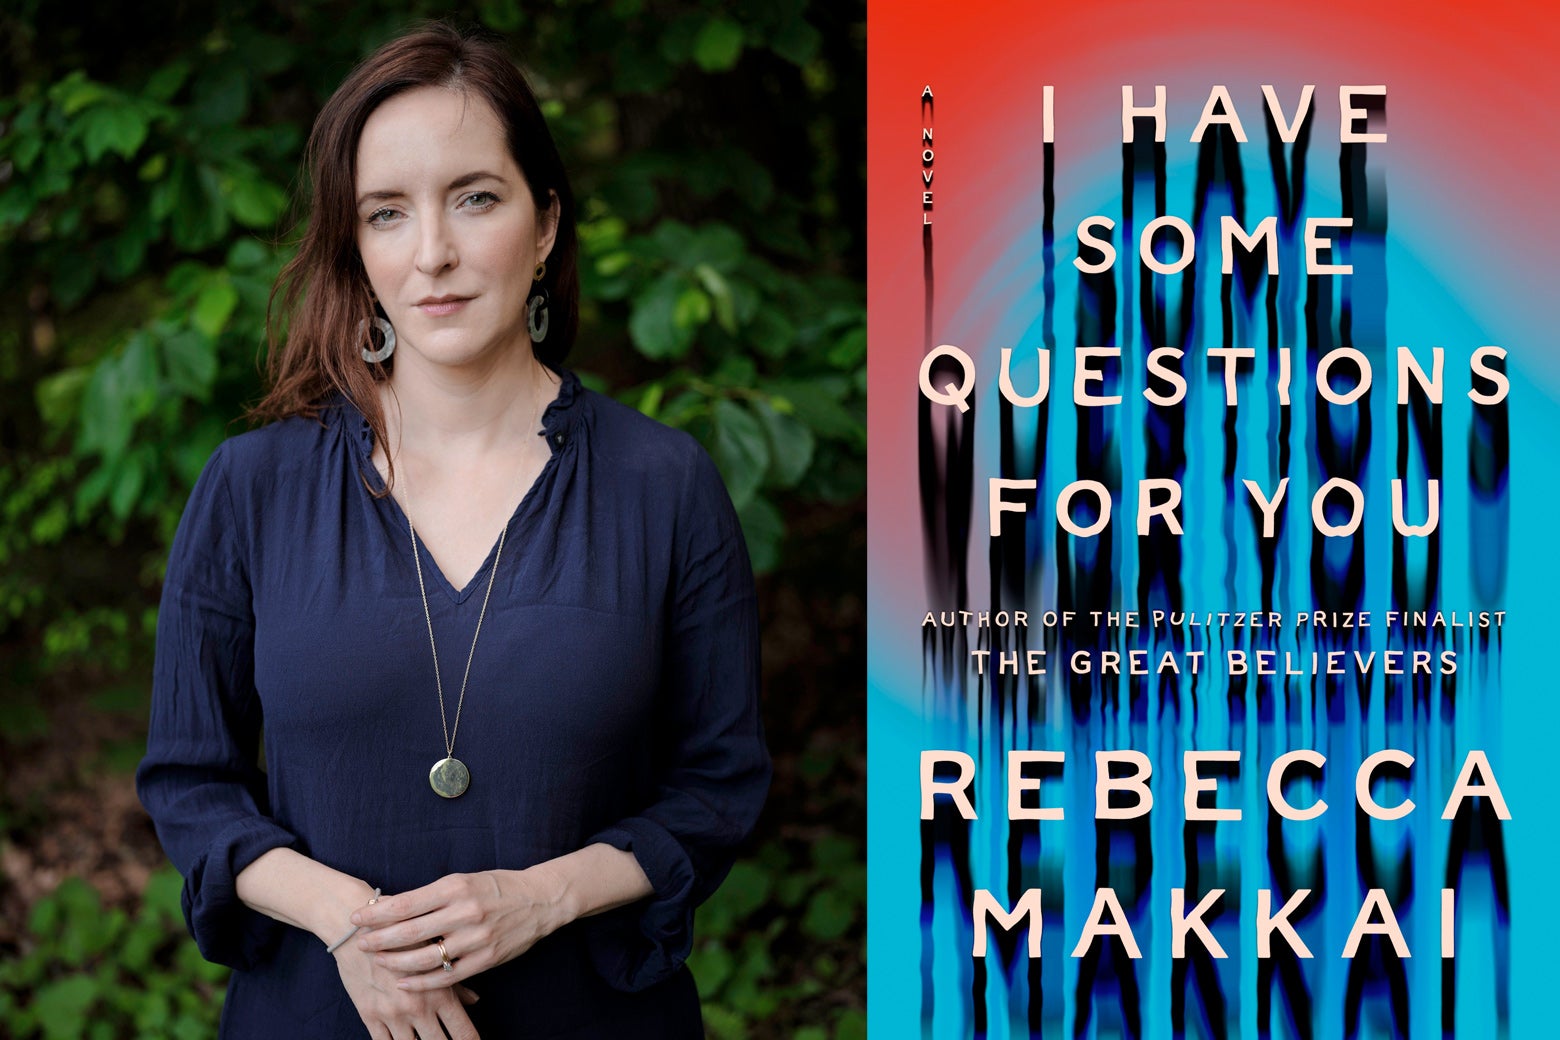 Rebecca Makkai and the cover of her new book.